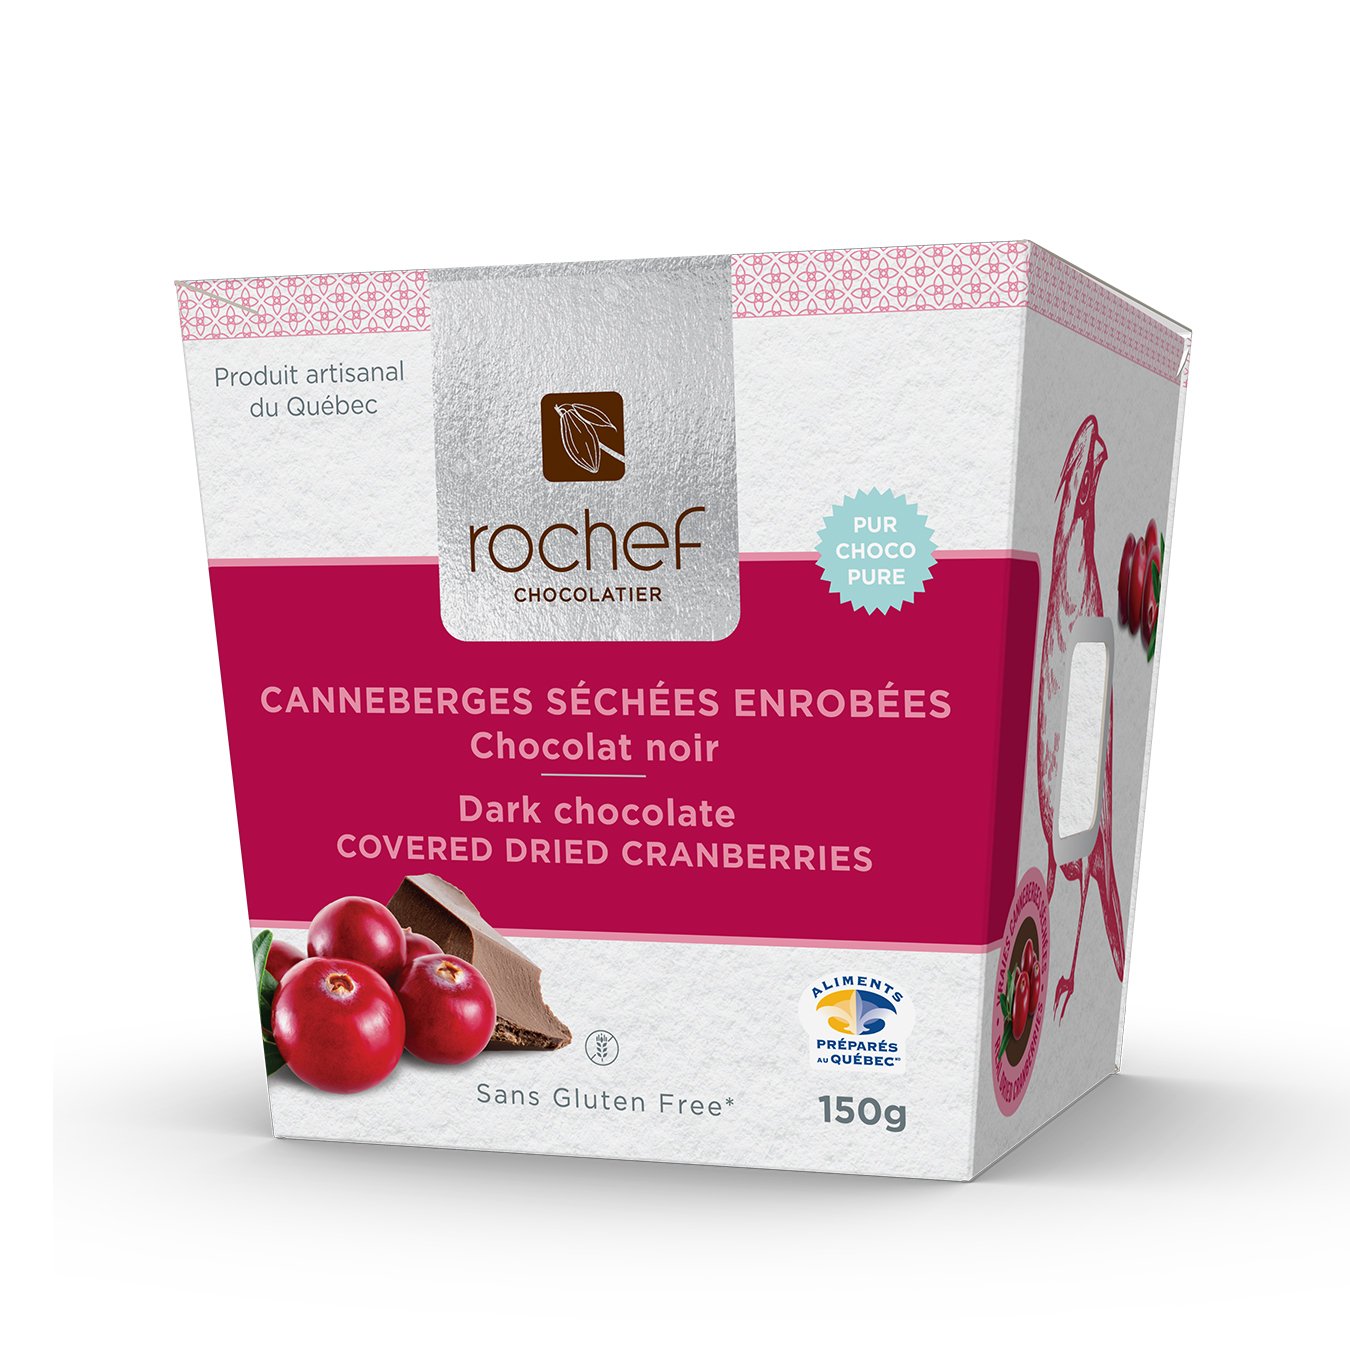 Dark chocolate covered real dried cranberries 150g. Gift box image